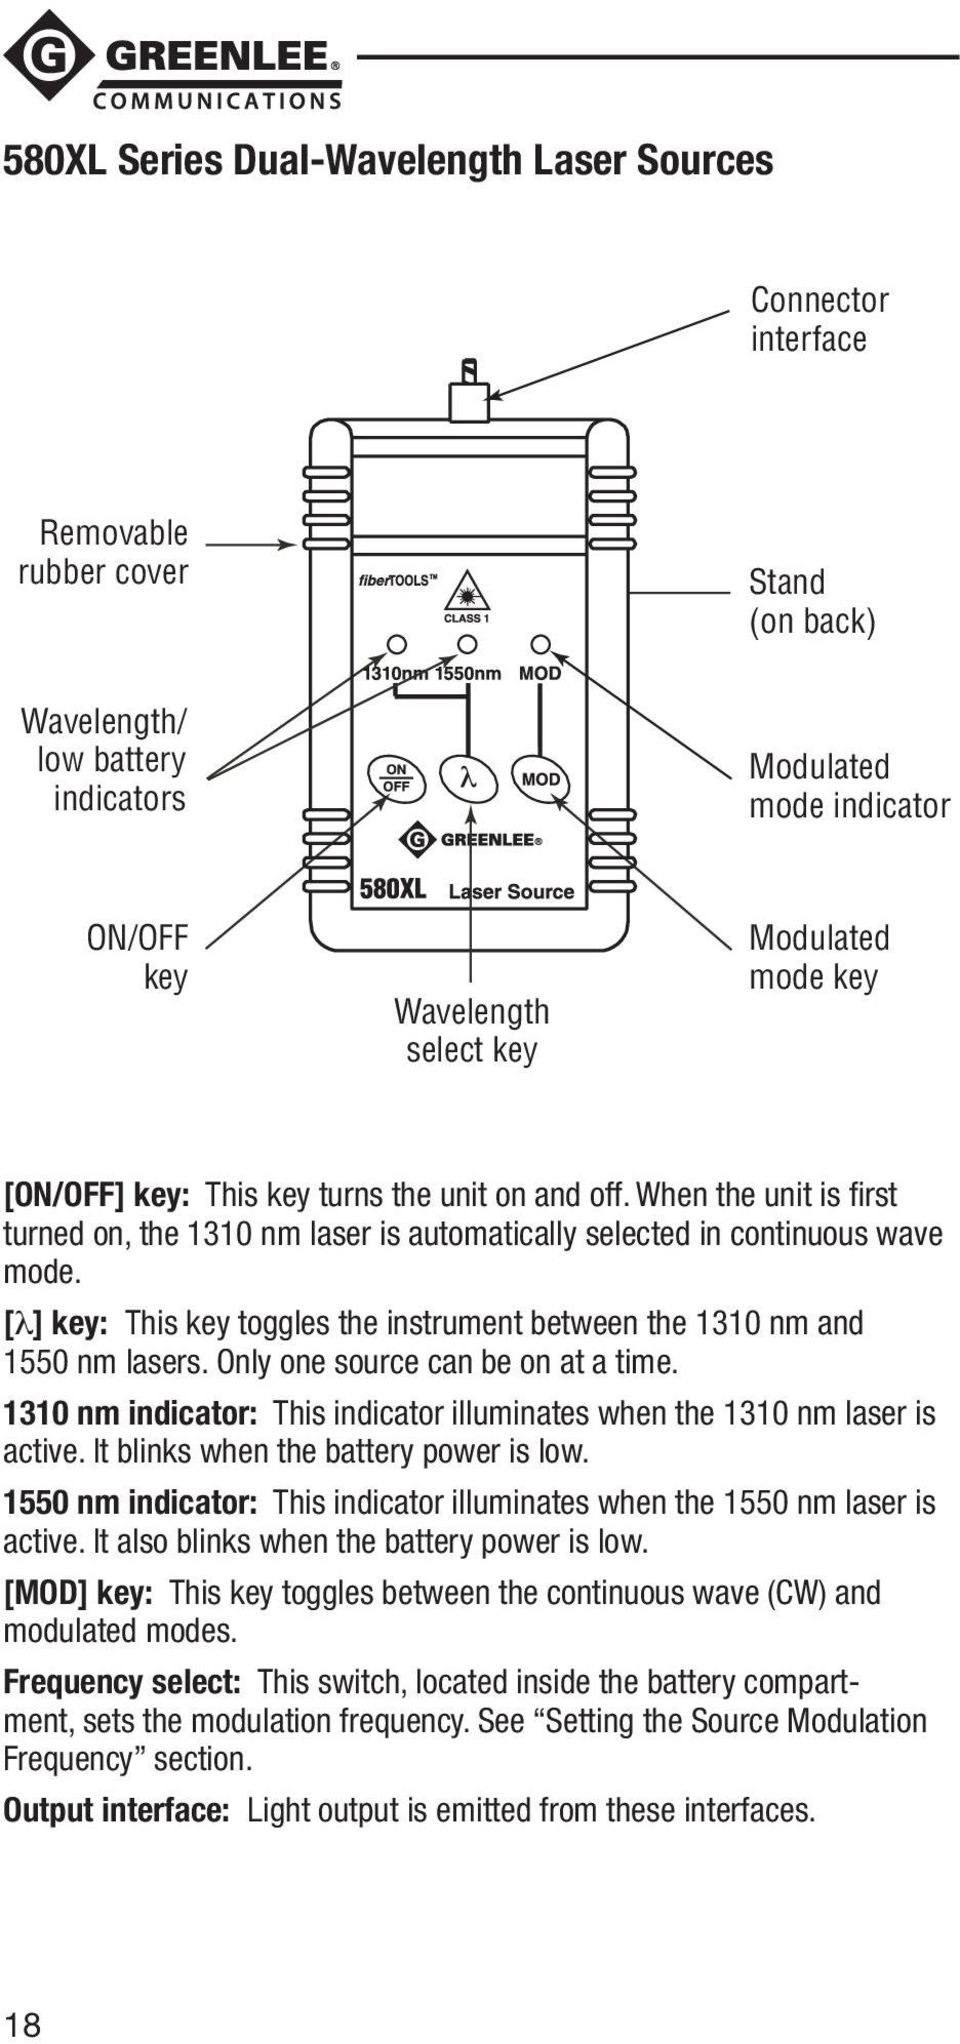 [l] key: This key toggles the instrument between the 1310 nm and 1550 nm lasers. Only one source can be on at a time. 1310 nm indicator: This indicator illuminates when the 1310 nm laser is active.